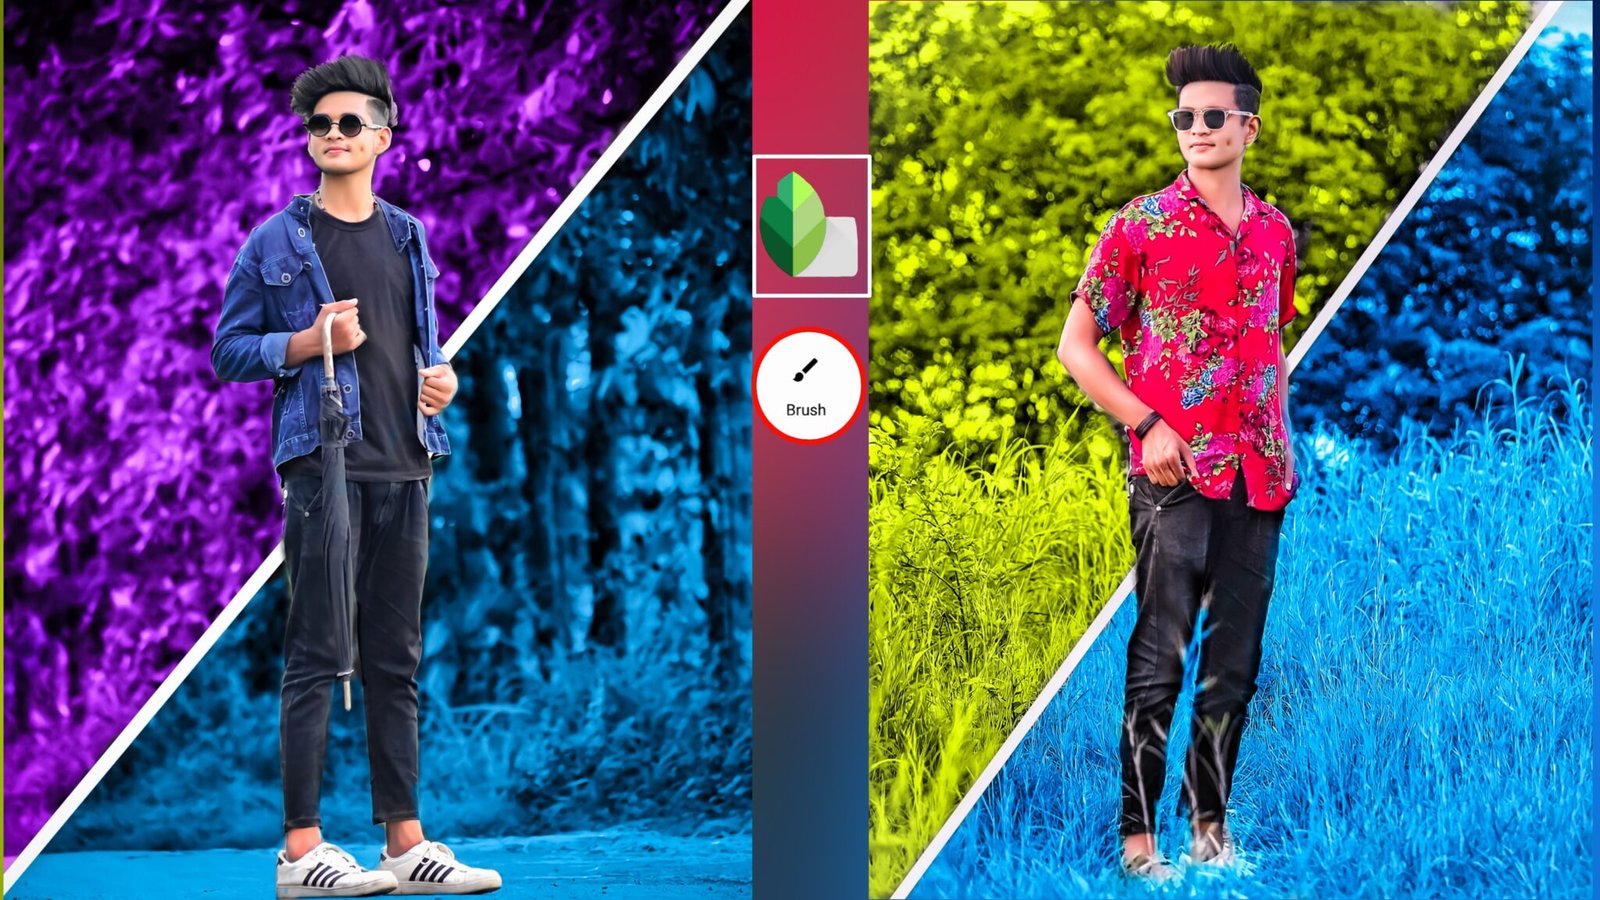 snapseed photo editing background hd images